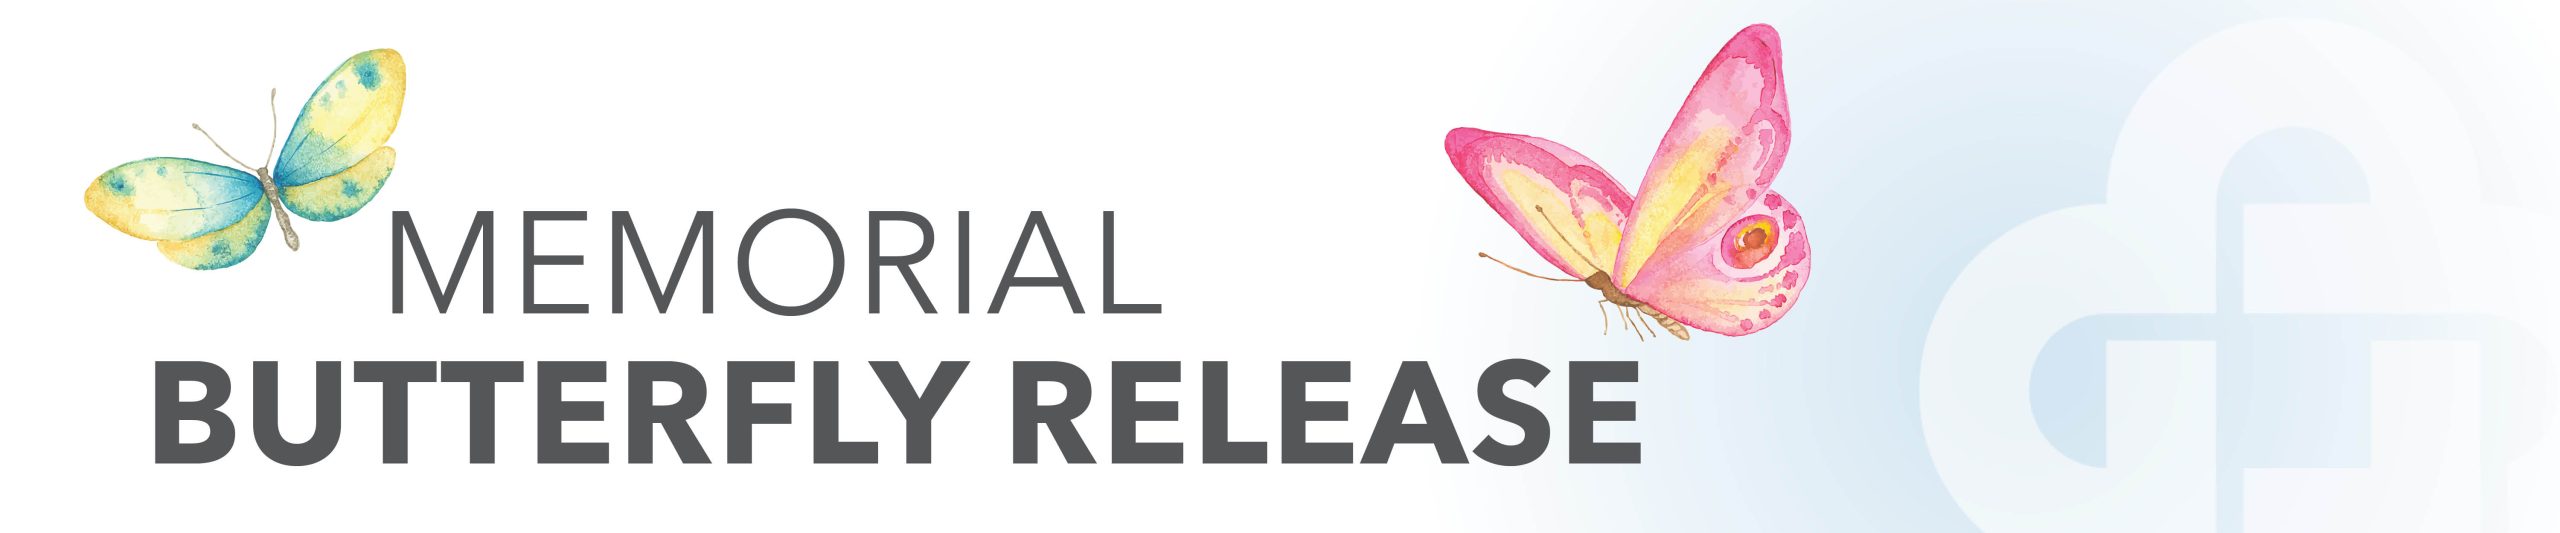 CLE-and-COL-Butterfly-Release-Banner-1